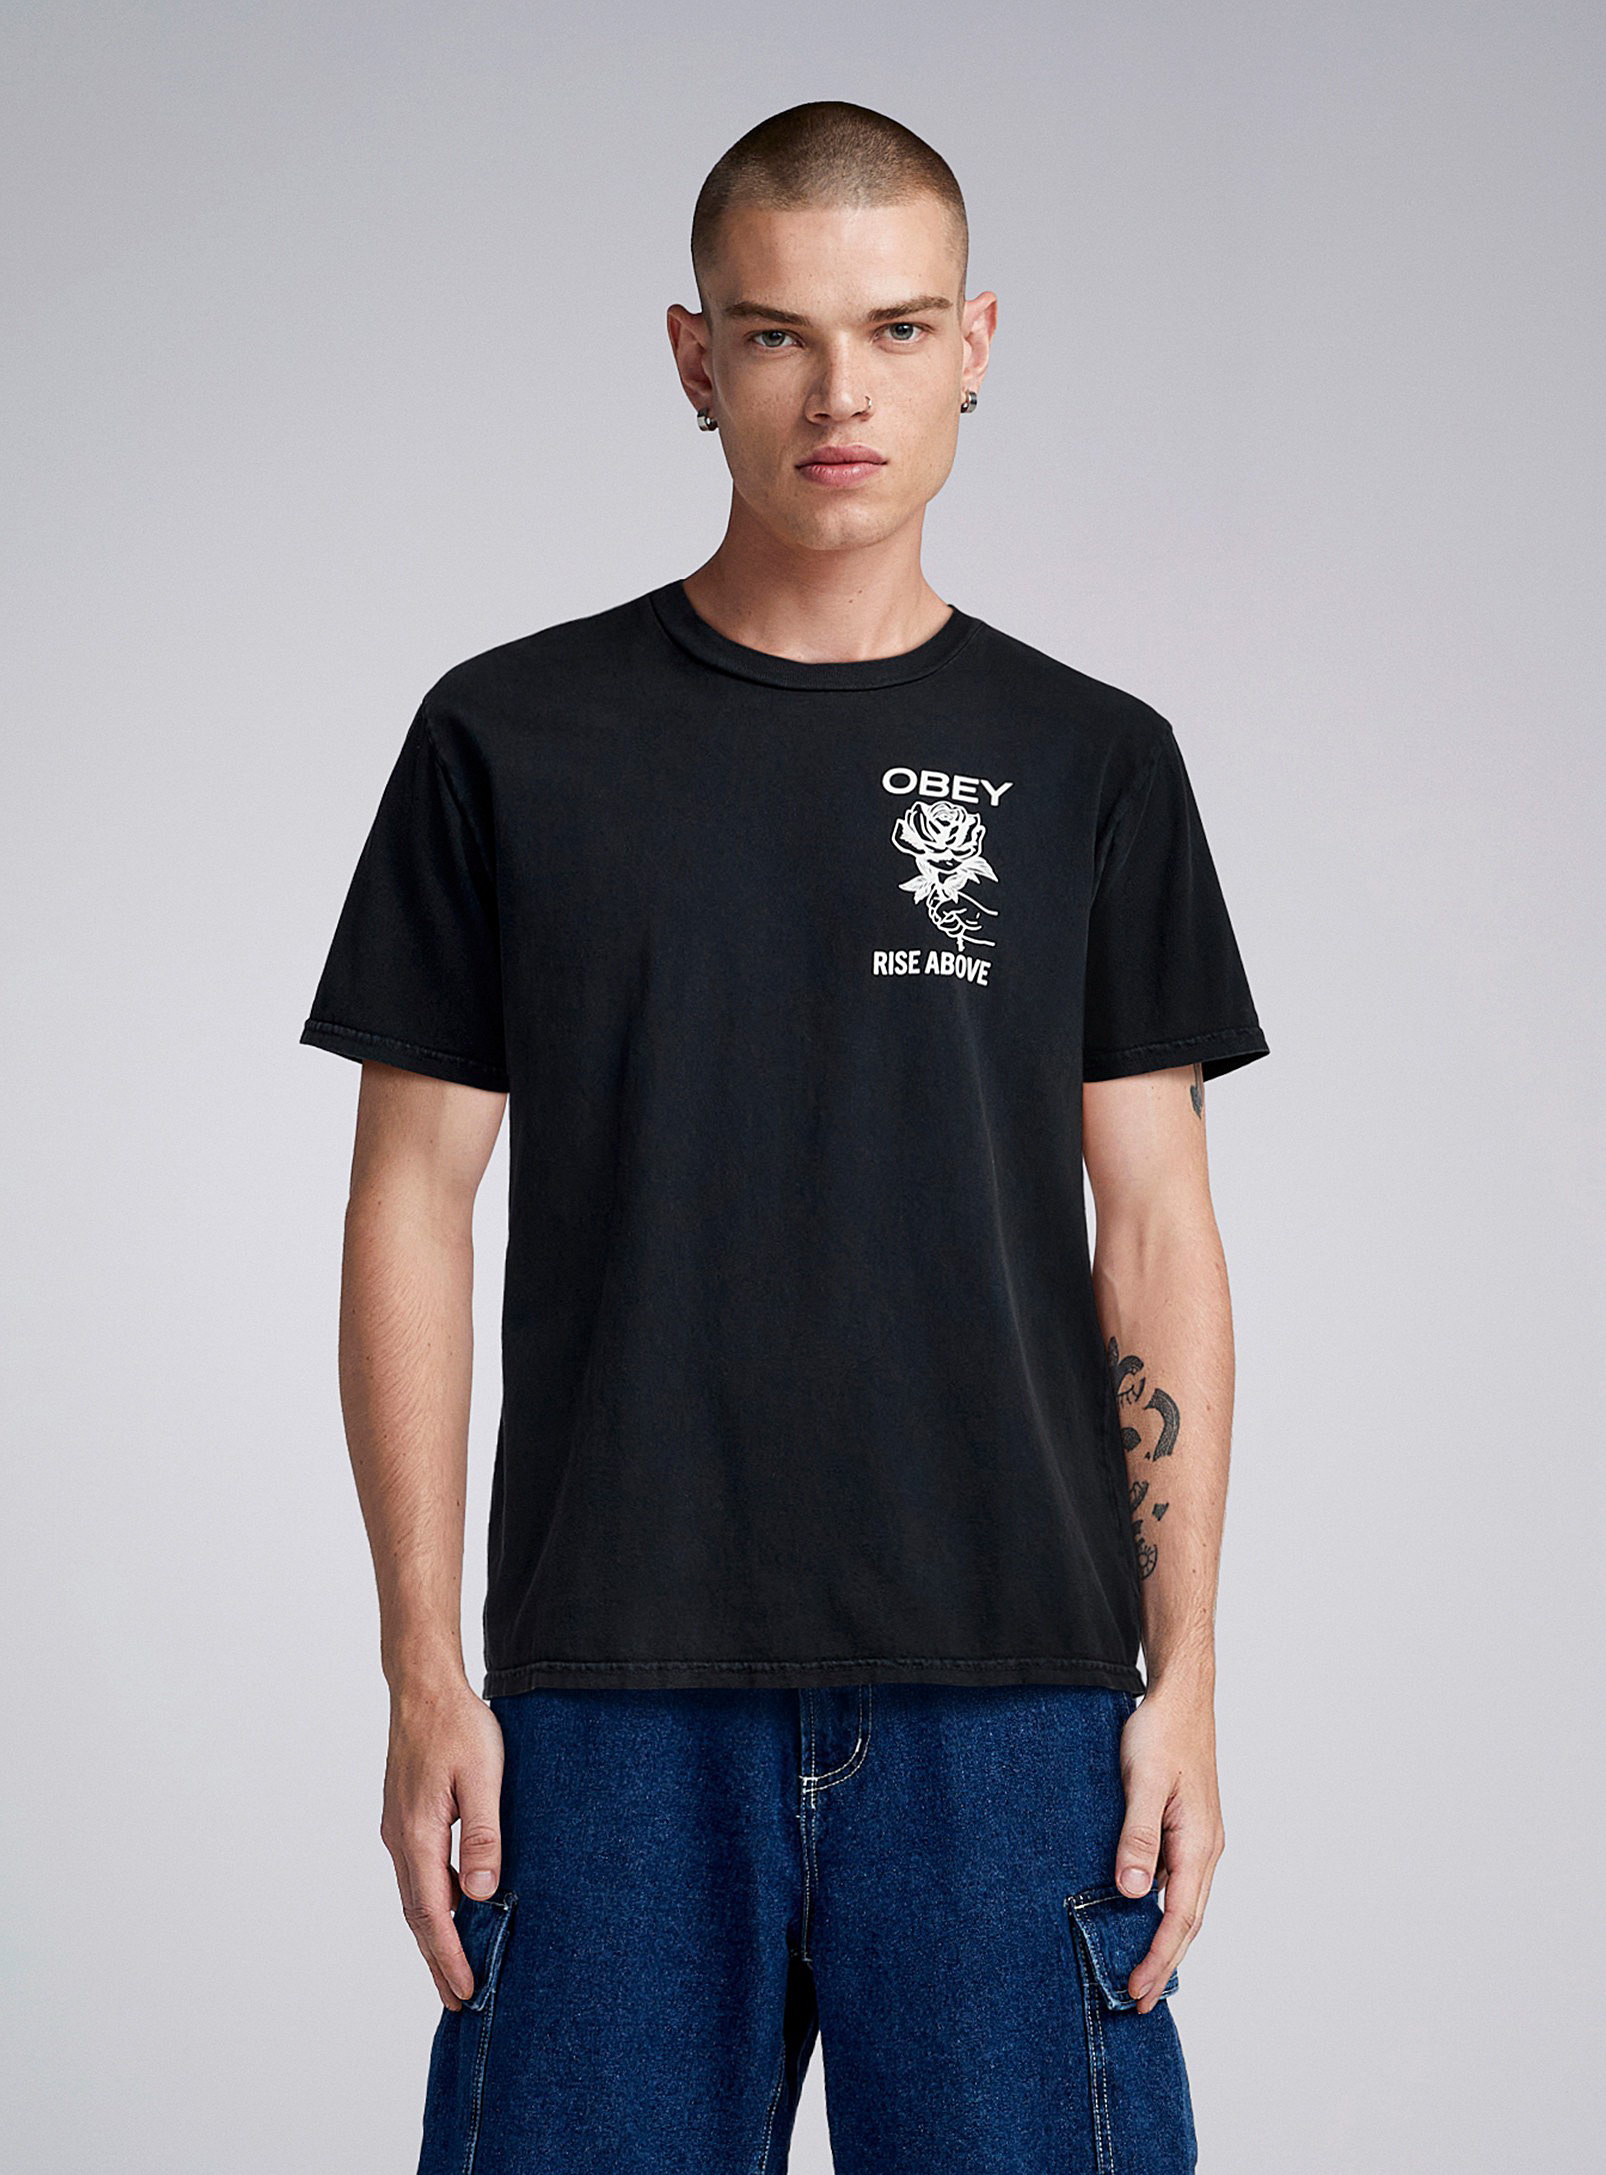 Obey - Men's Rise Above Rose T-shirt